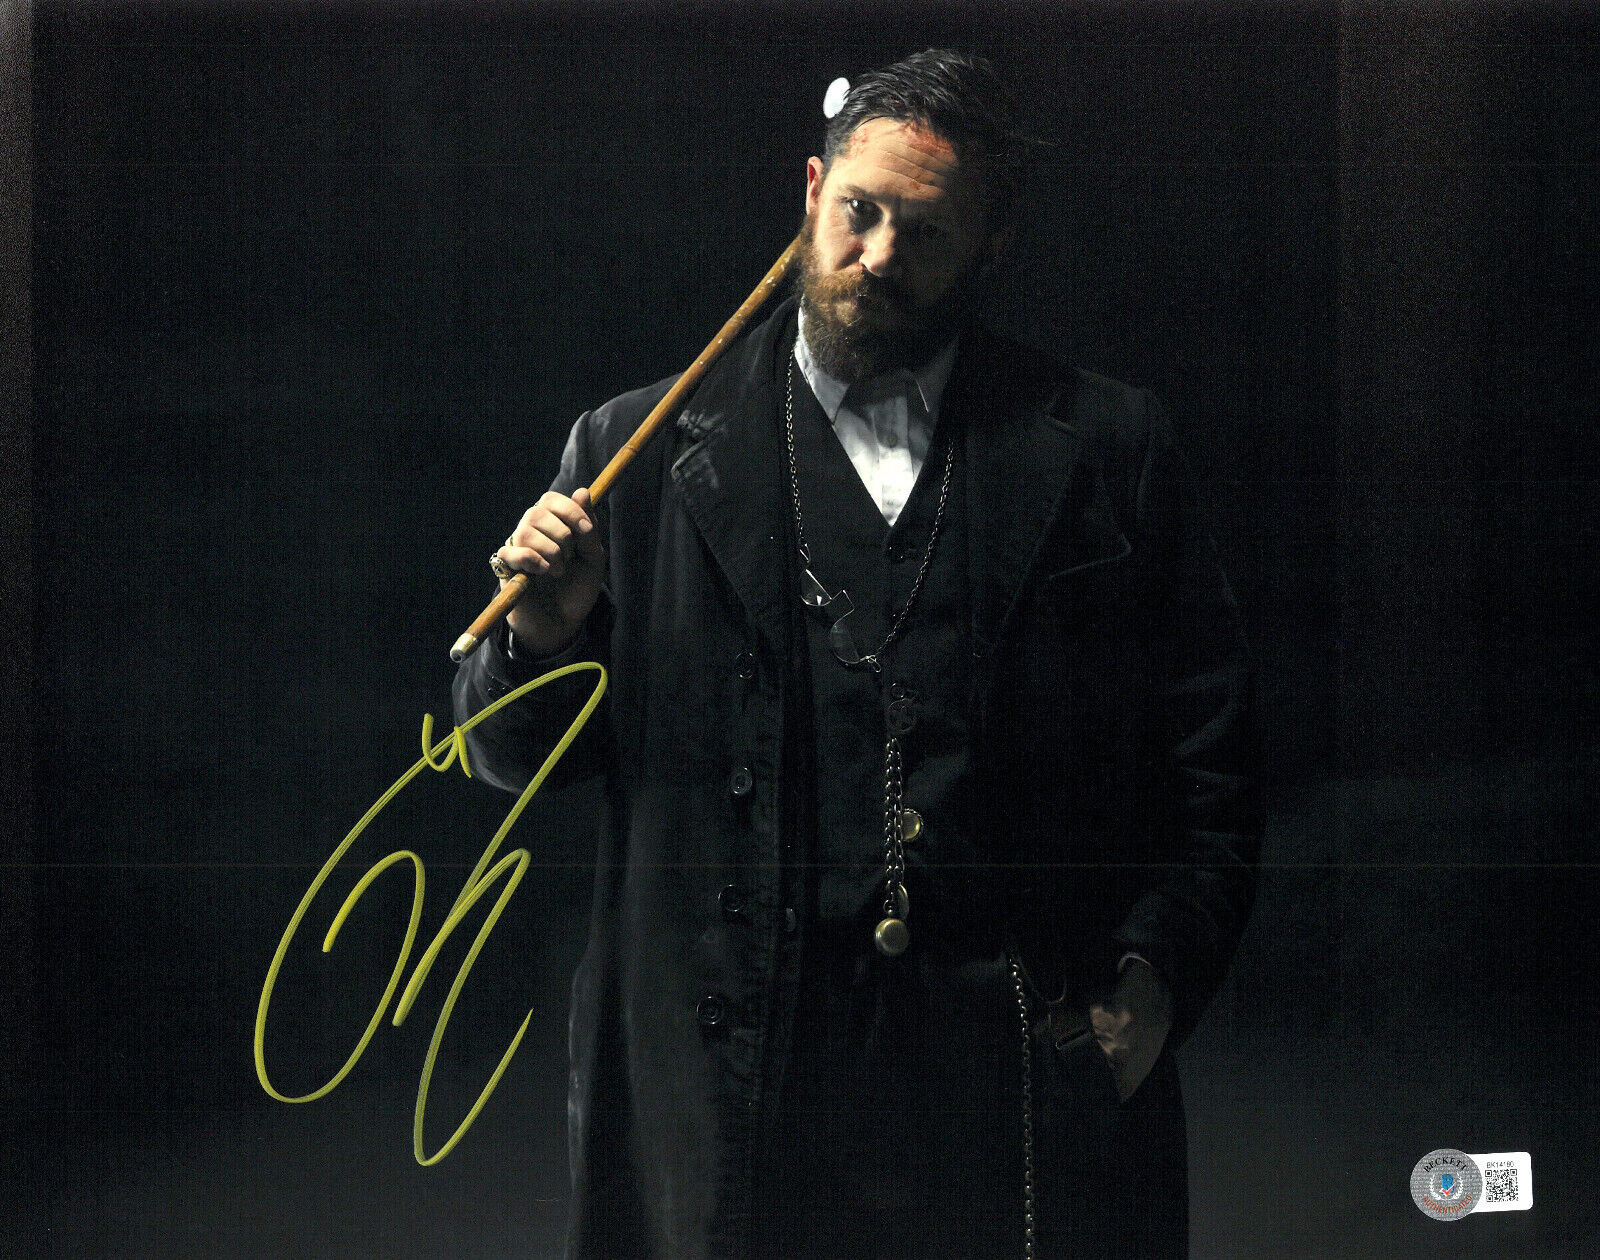 TOM HARDY SIGNED AUTOGRAPH PEAKY BLINDERS 11X14 PHOTO BECKETT BAS